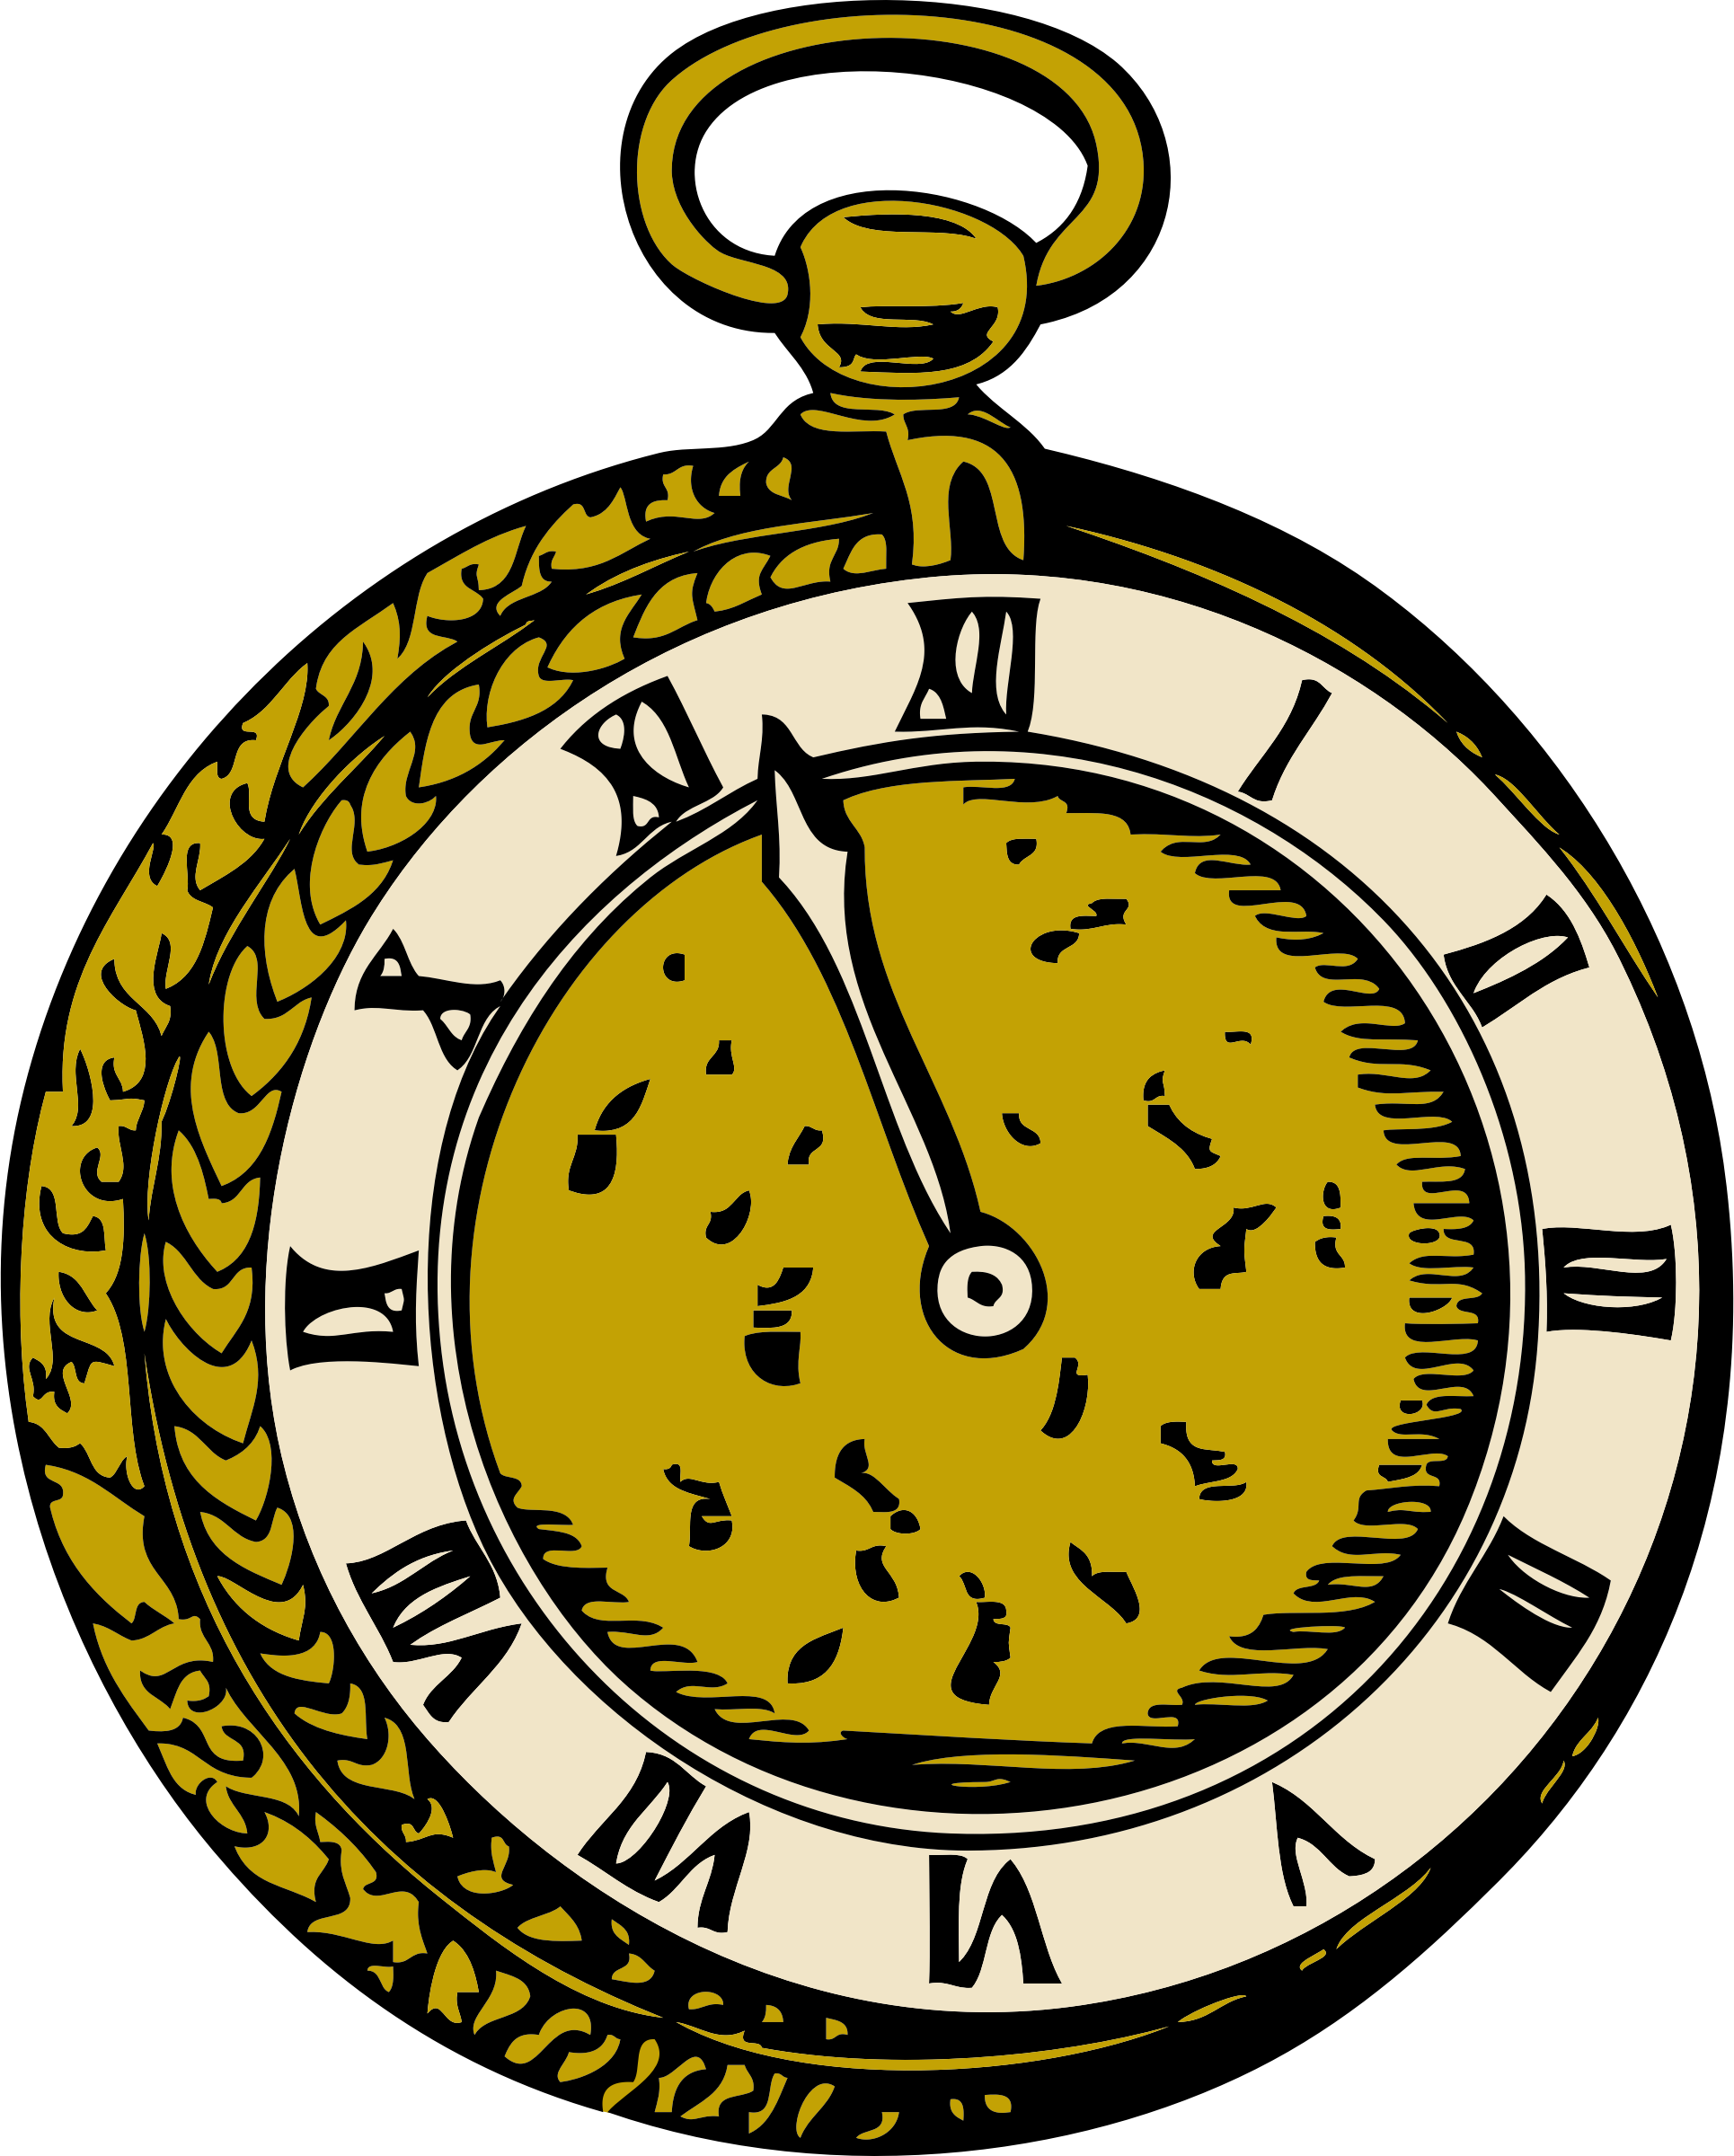 see clipart pocket watch